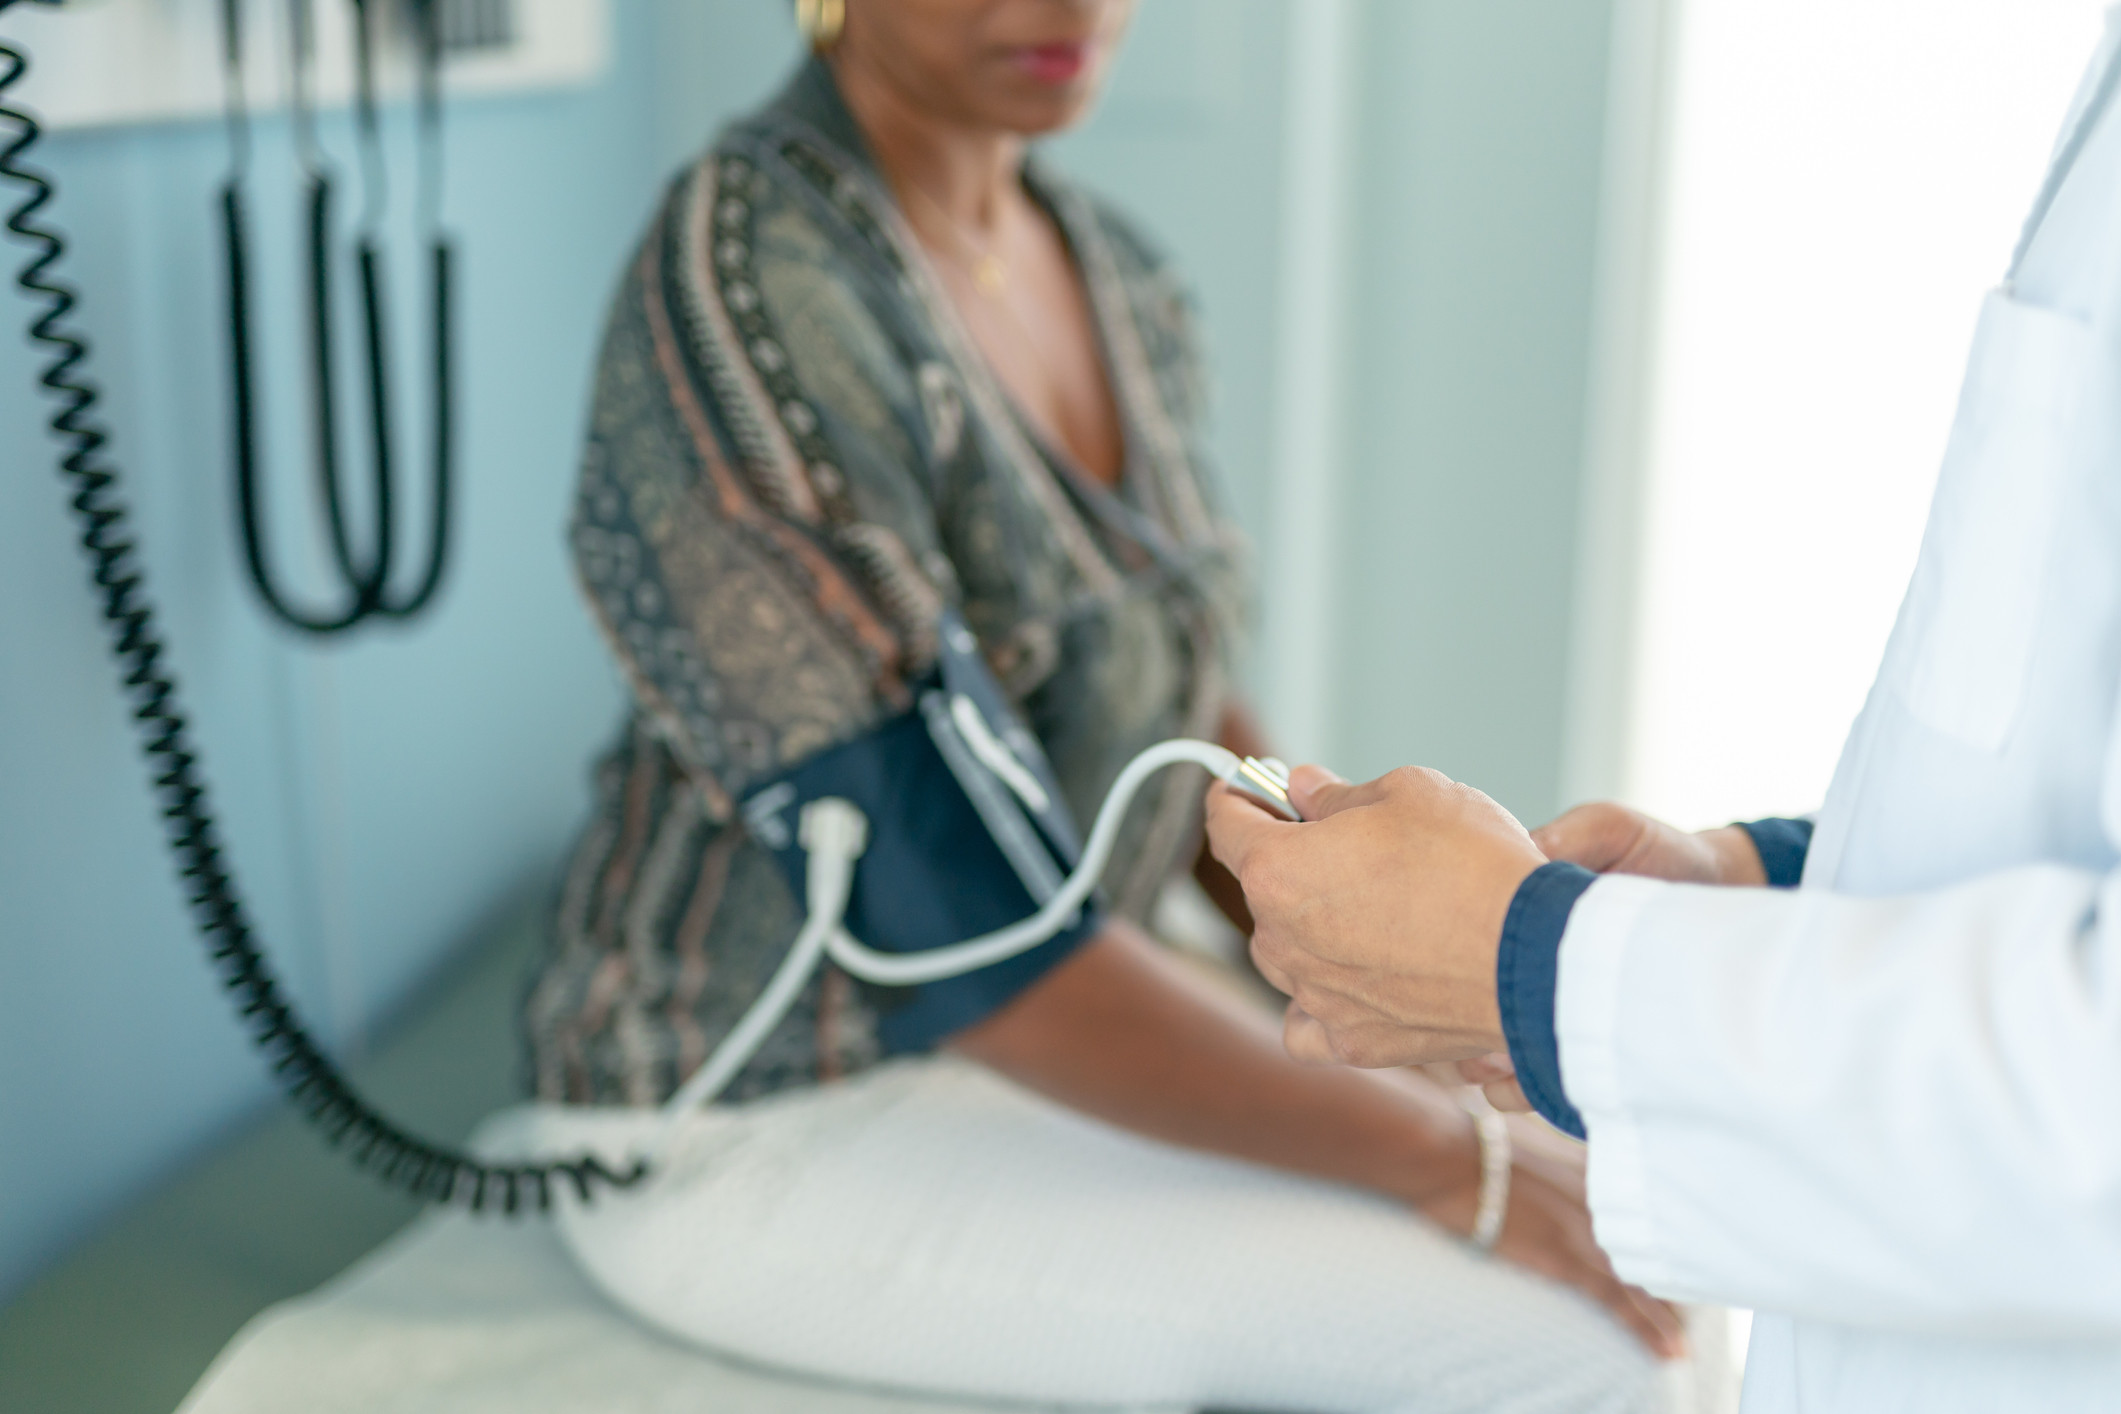 STRESS CAN KILL: HYPERTENSION IN BLACK AMERICANS